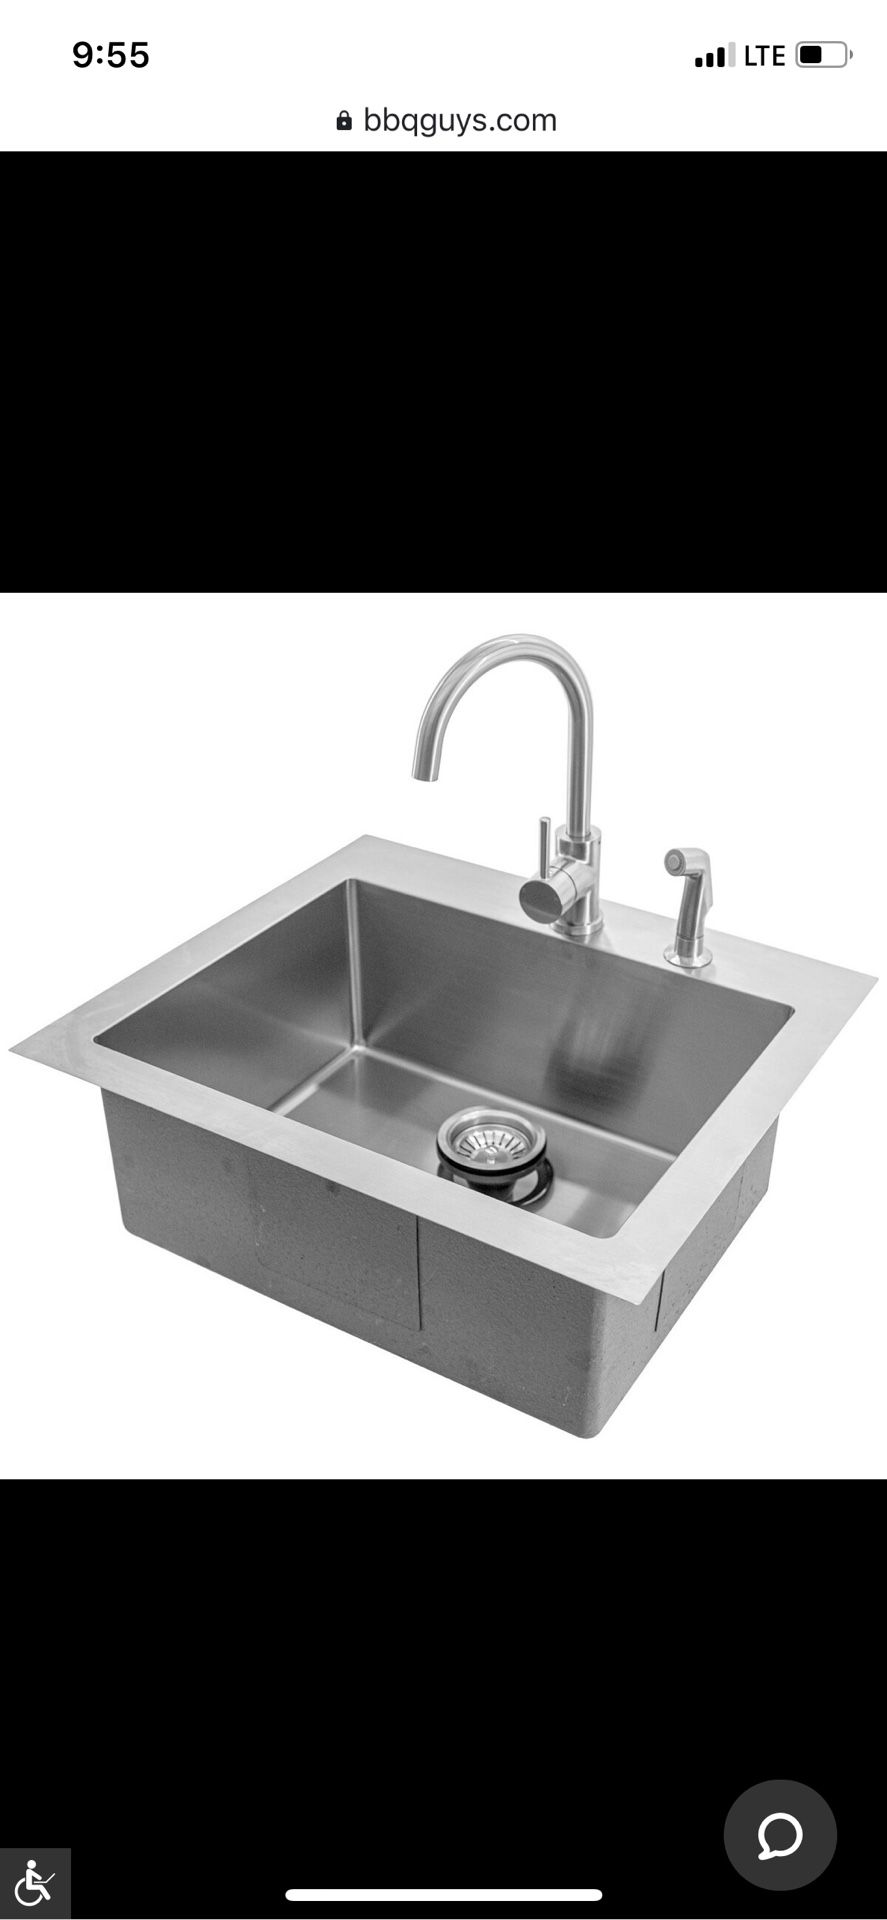 25 x 22 outdoor stainless steel drop-in kitchen sink with hot/cold faucet